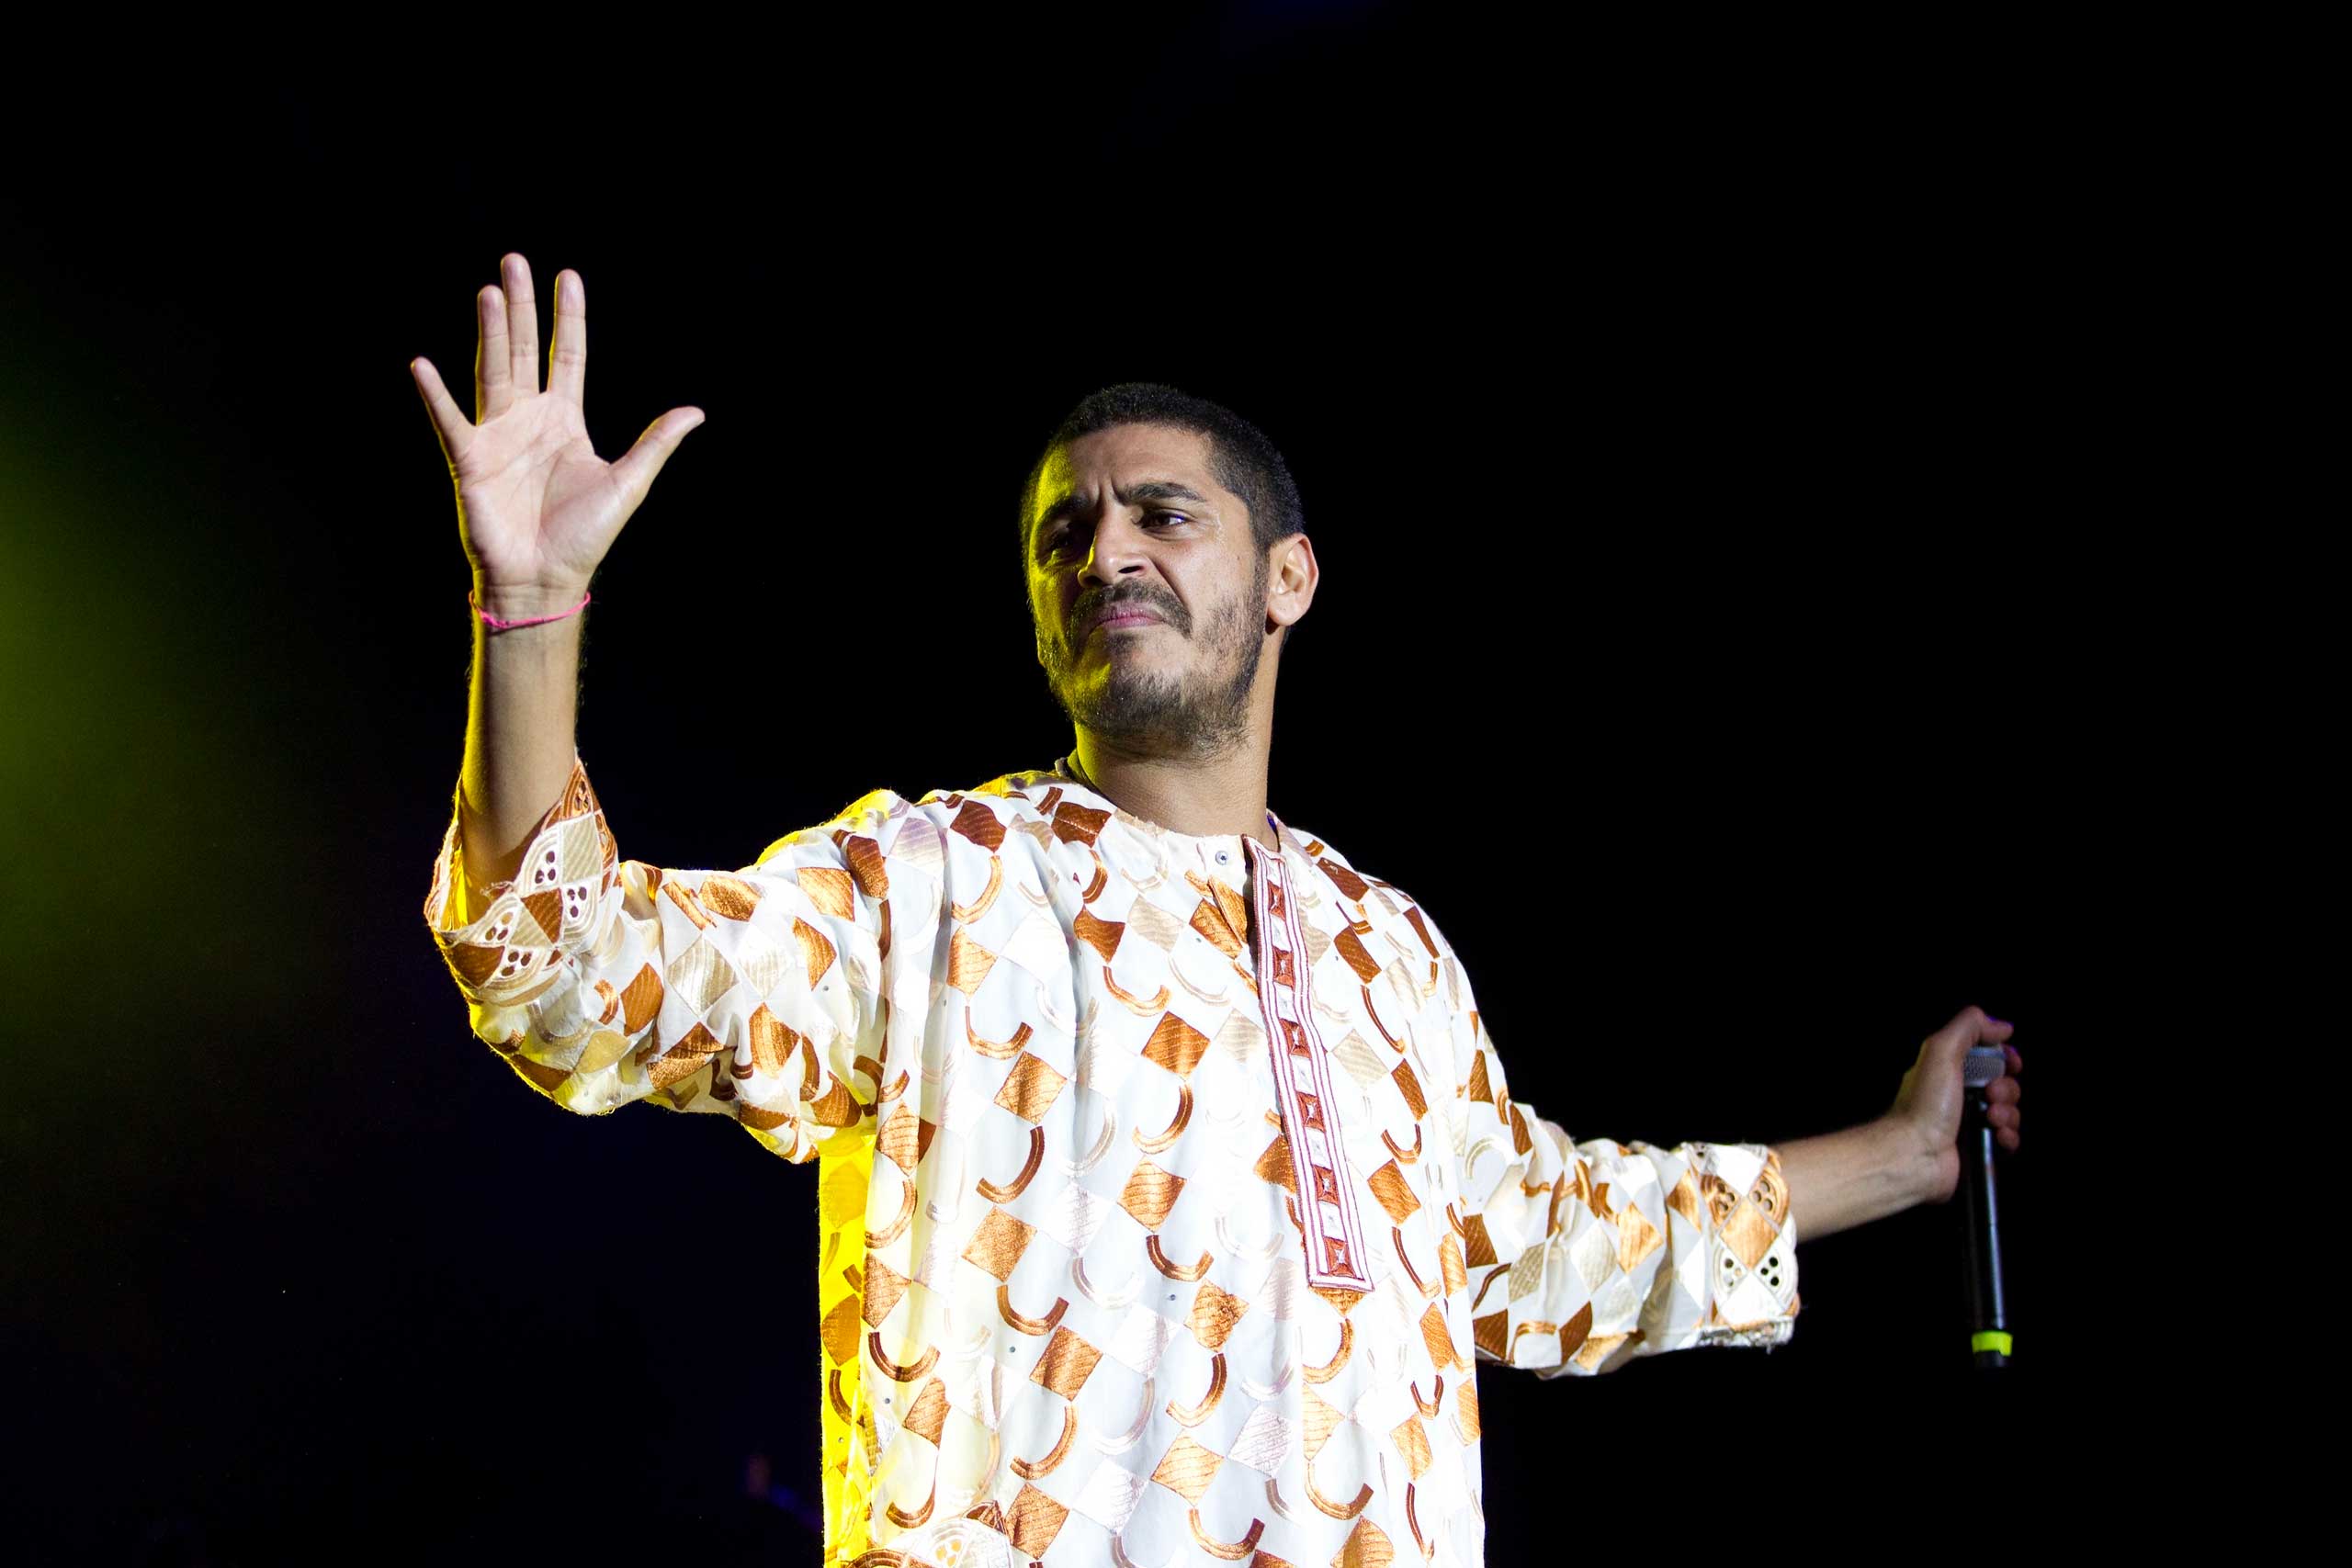 Criolo performing in London 2012. (Jeff Gilbert—LatinContent/Getty Images)